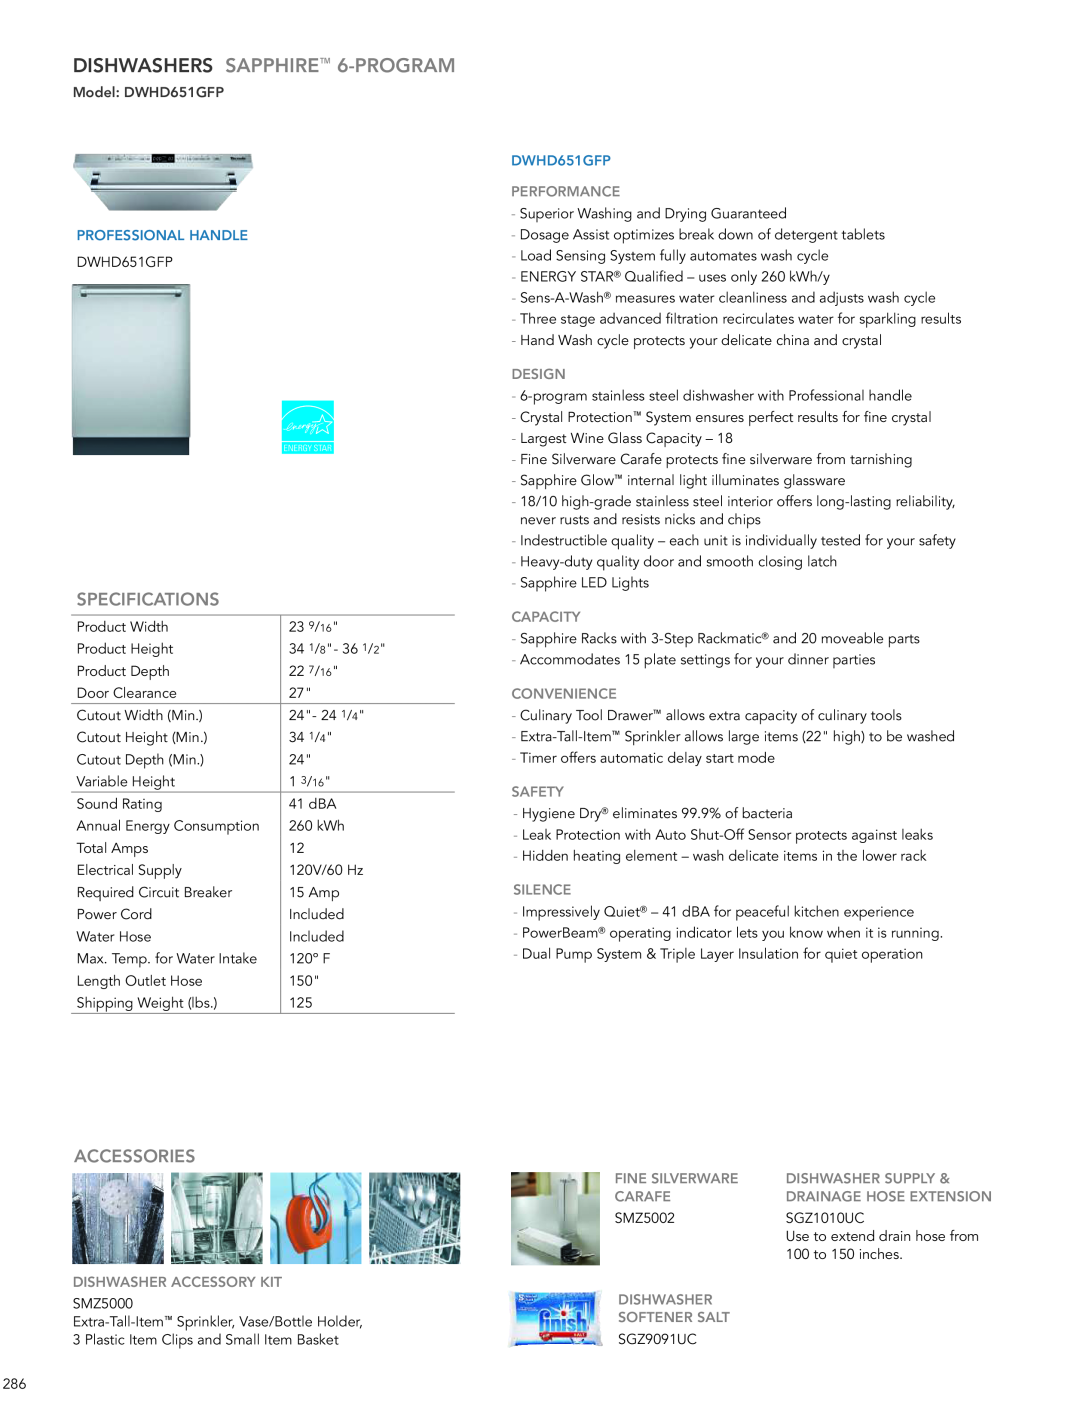 Thermador manual Model DWHD651GFP, DISHWASHERS SAPPHIRE 6-PROGRAM, Specifications, Accessories, Professional Handle 